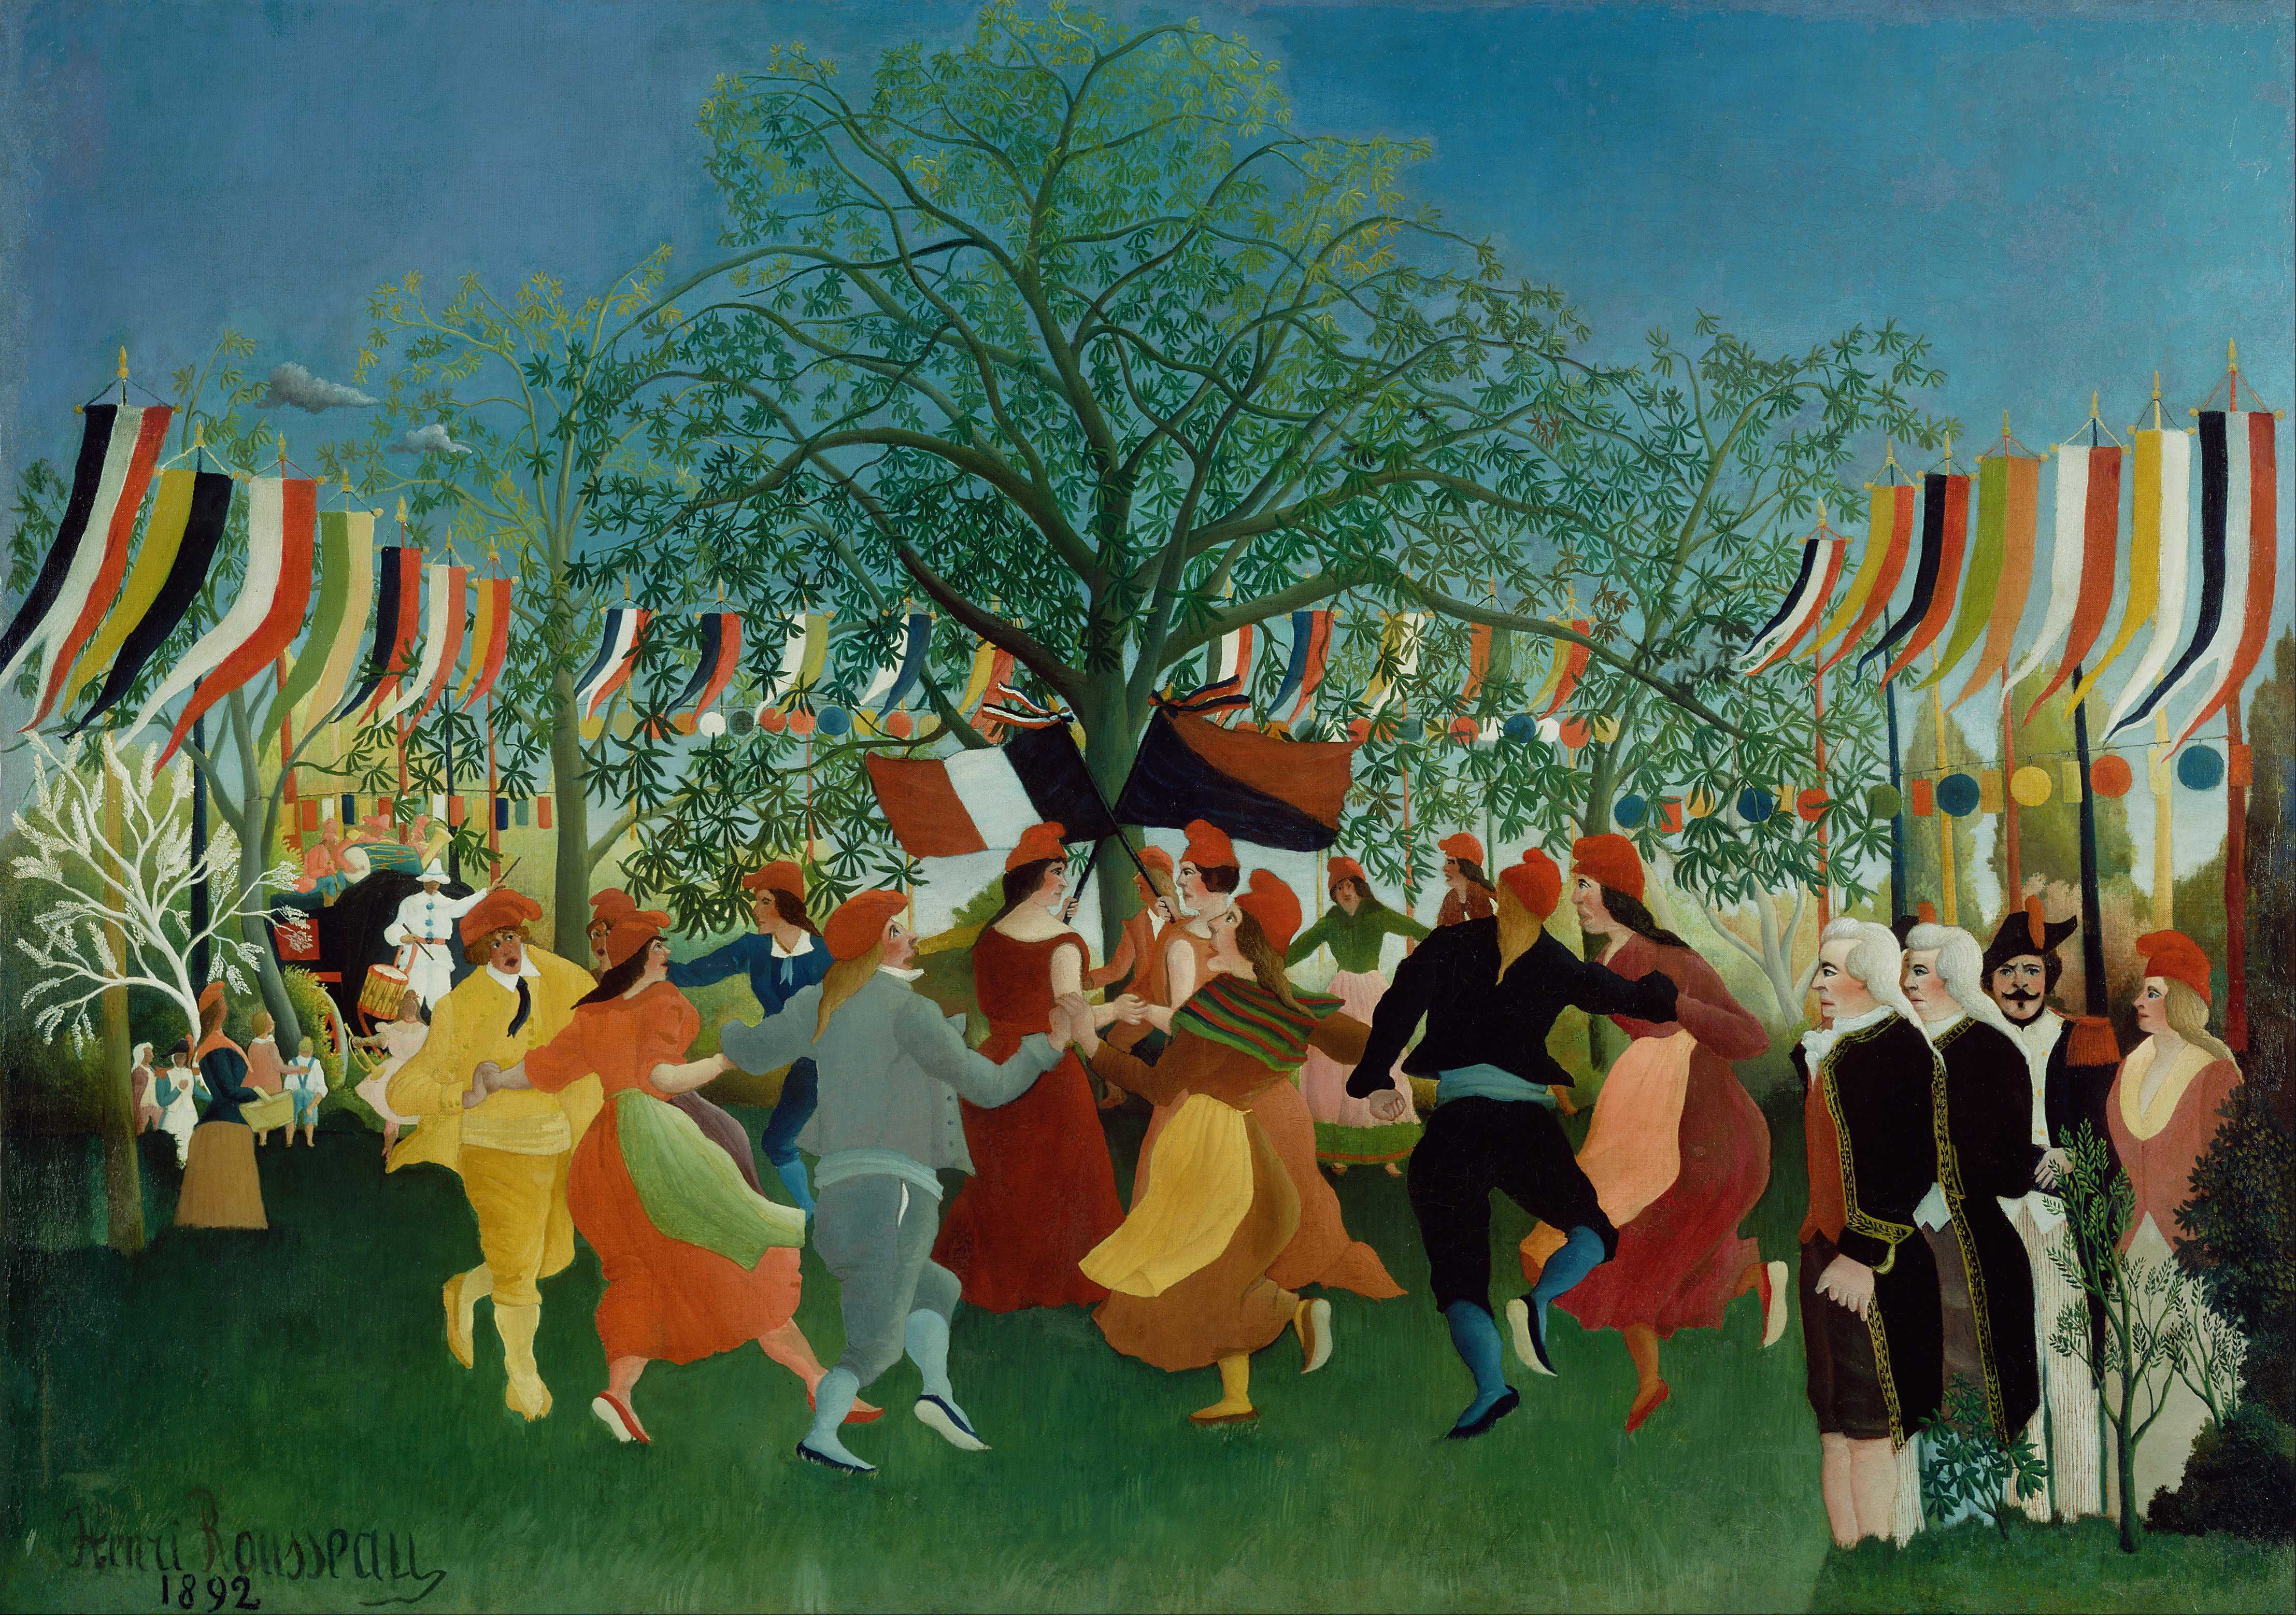 Find out more about Henri Rousseau - A Centennial of Independence